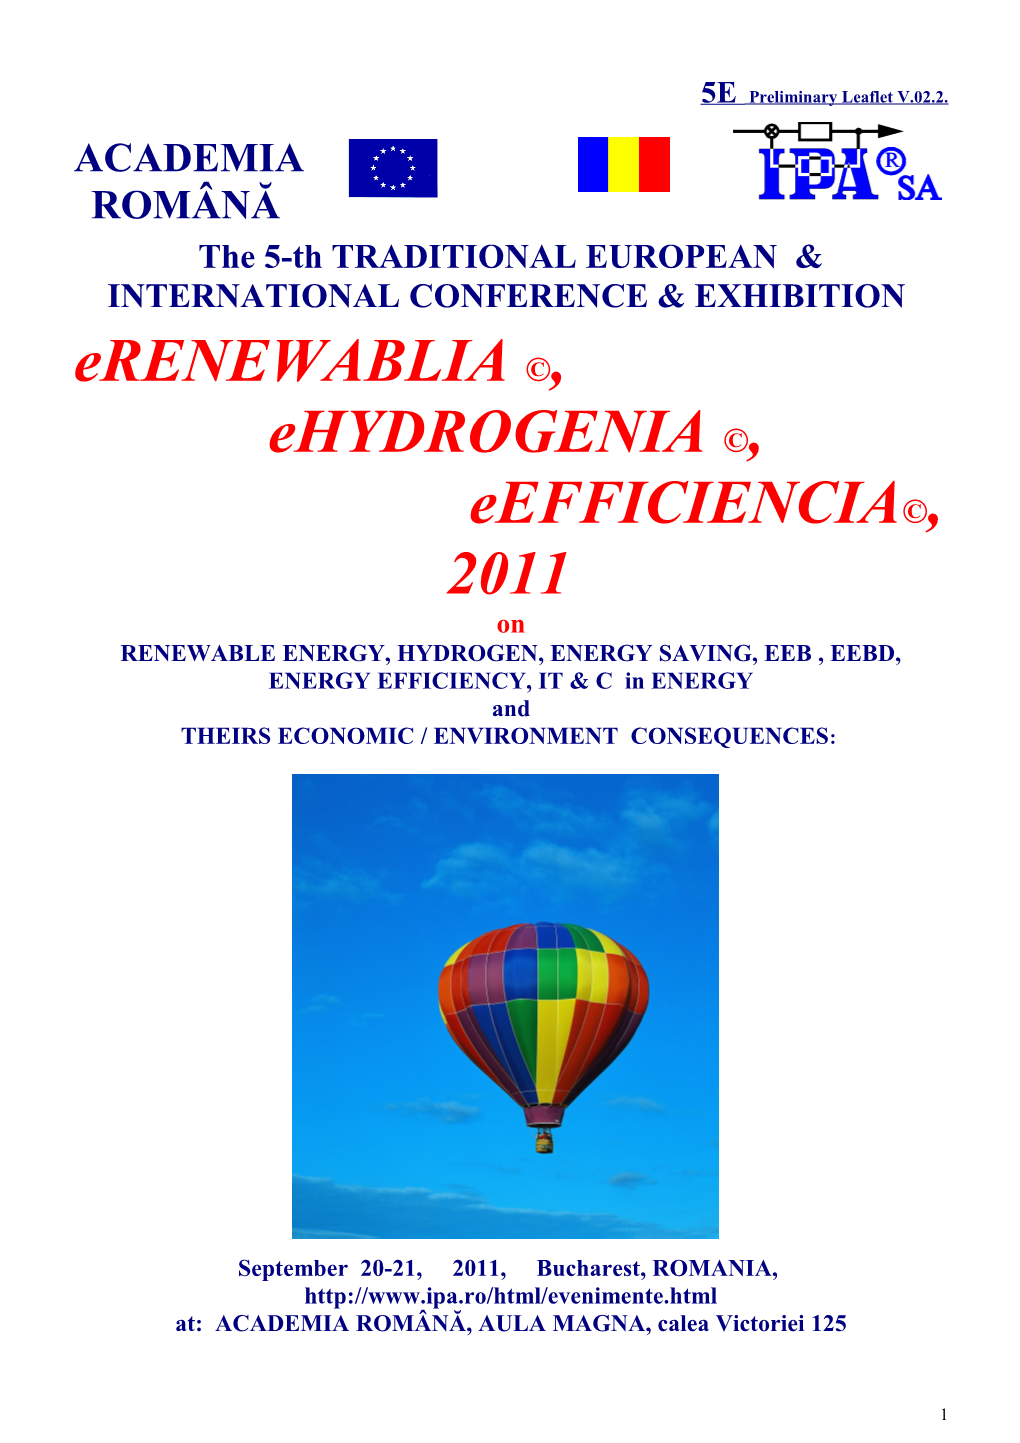 The 5-Thtraditional EUROPEAN & INTERNATIONAL CONFERENCE & EXHIBITION